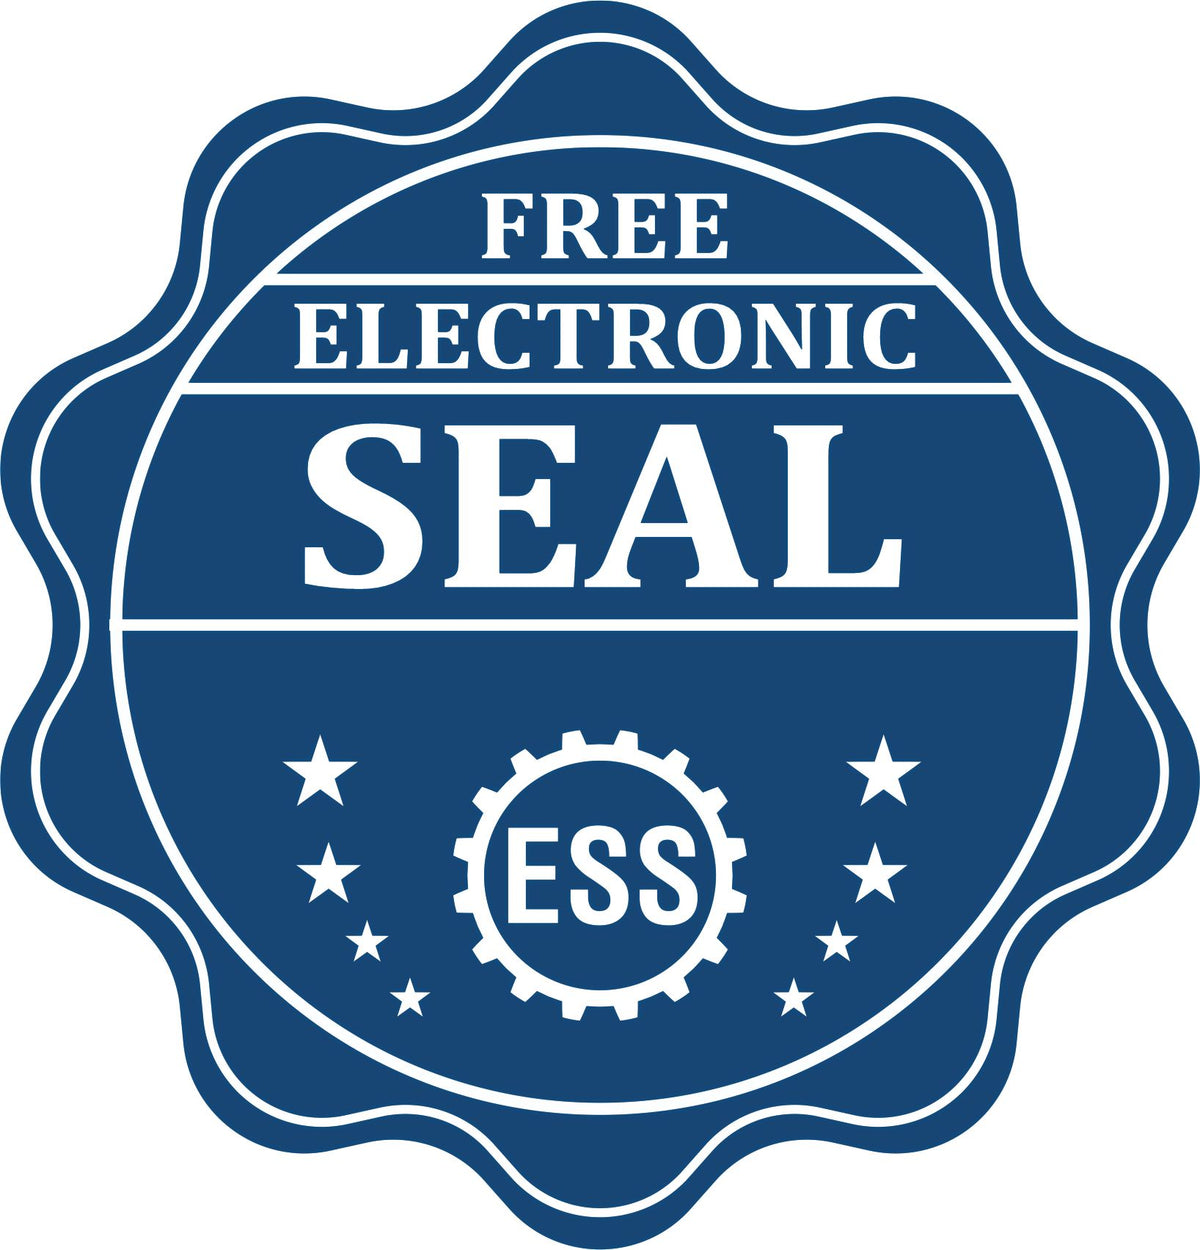 A badge showing a free electronic seal for the Handheld Hawaii Professional Geologist Embosser with stars and the ESS gear on the emblem.